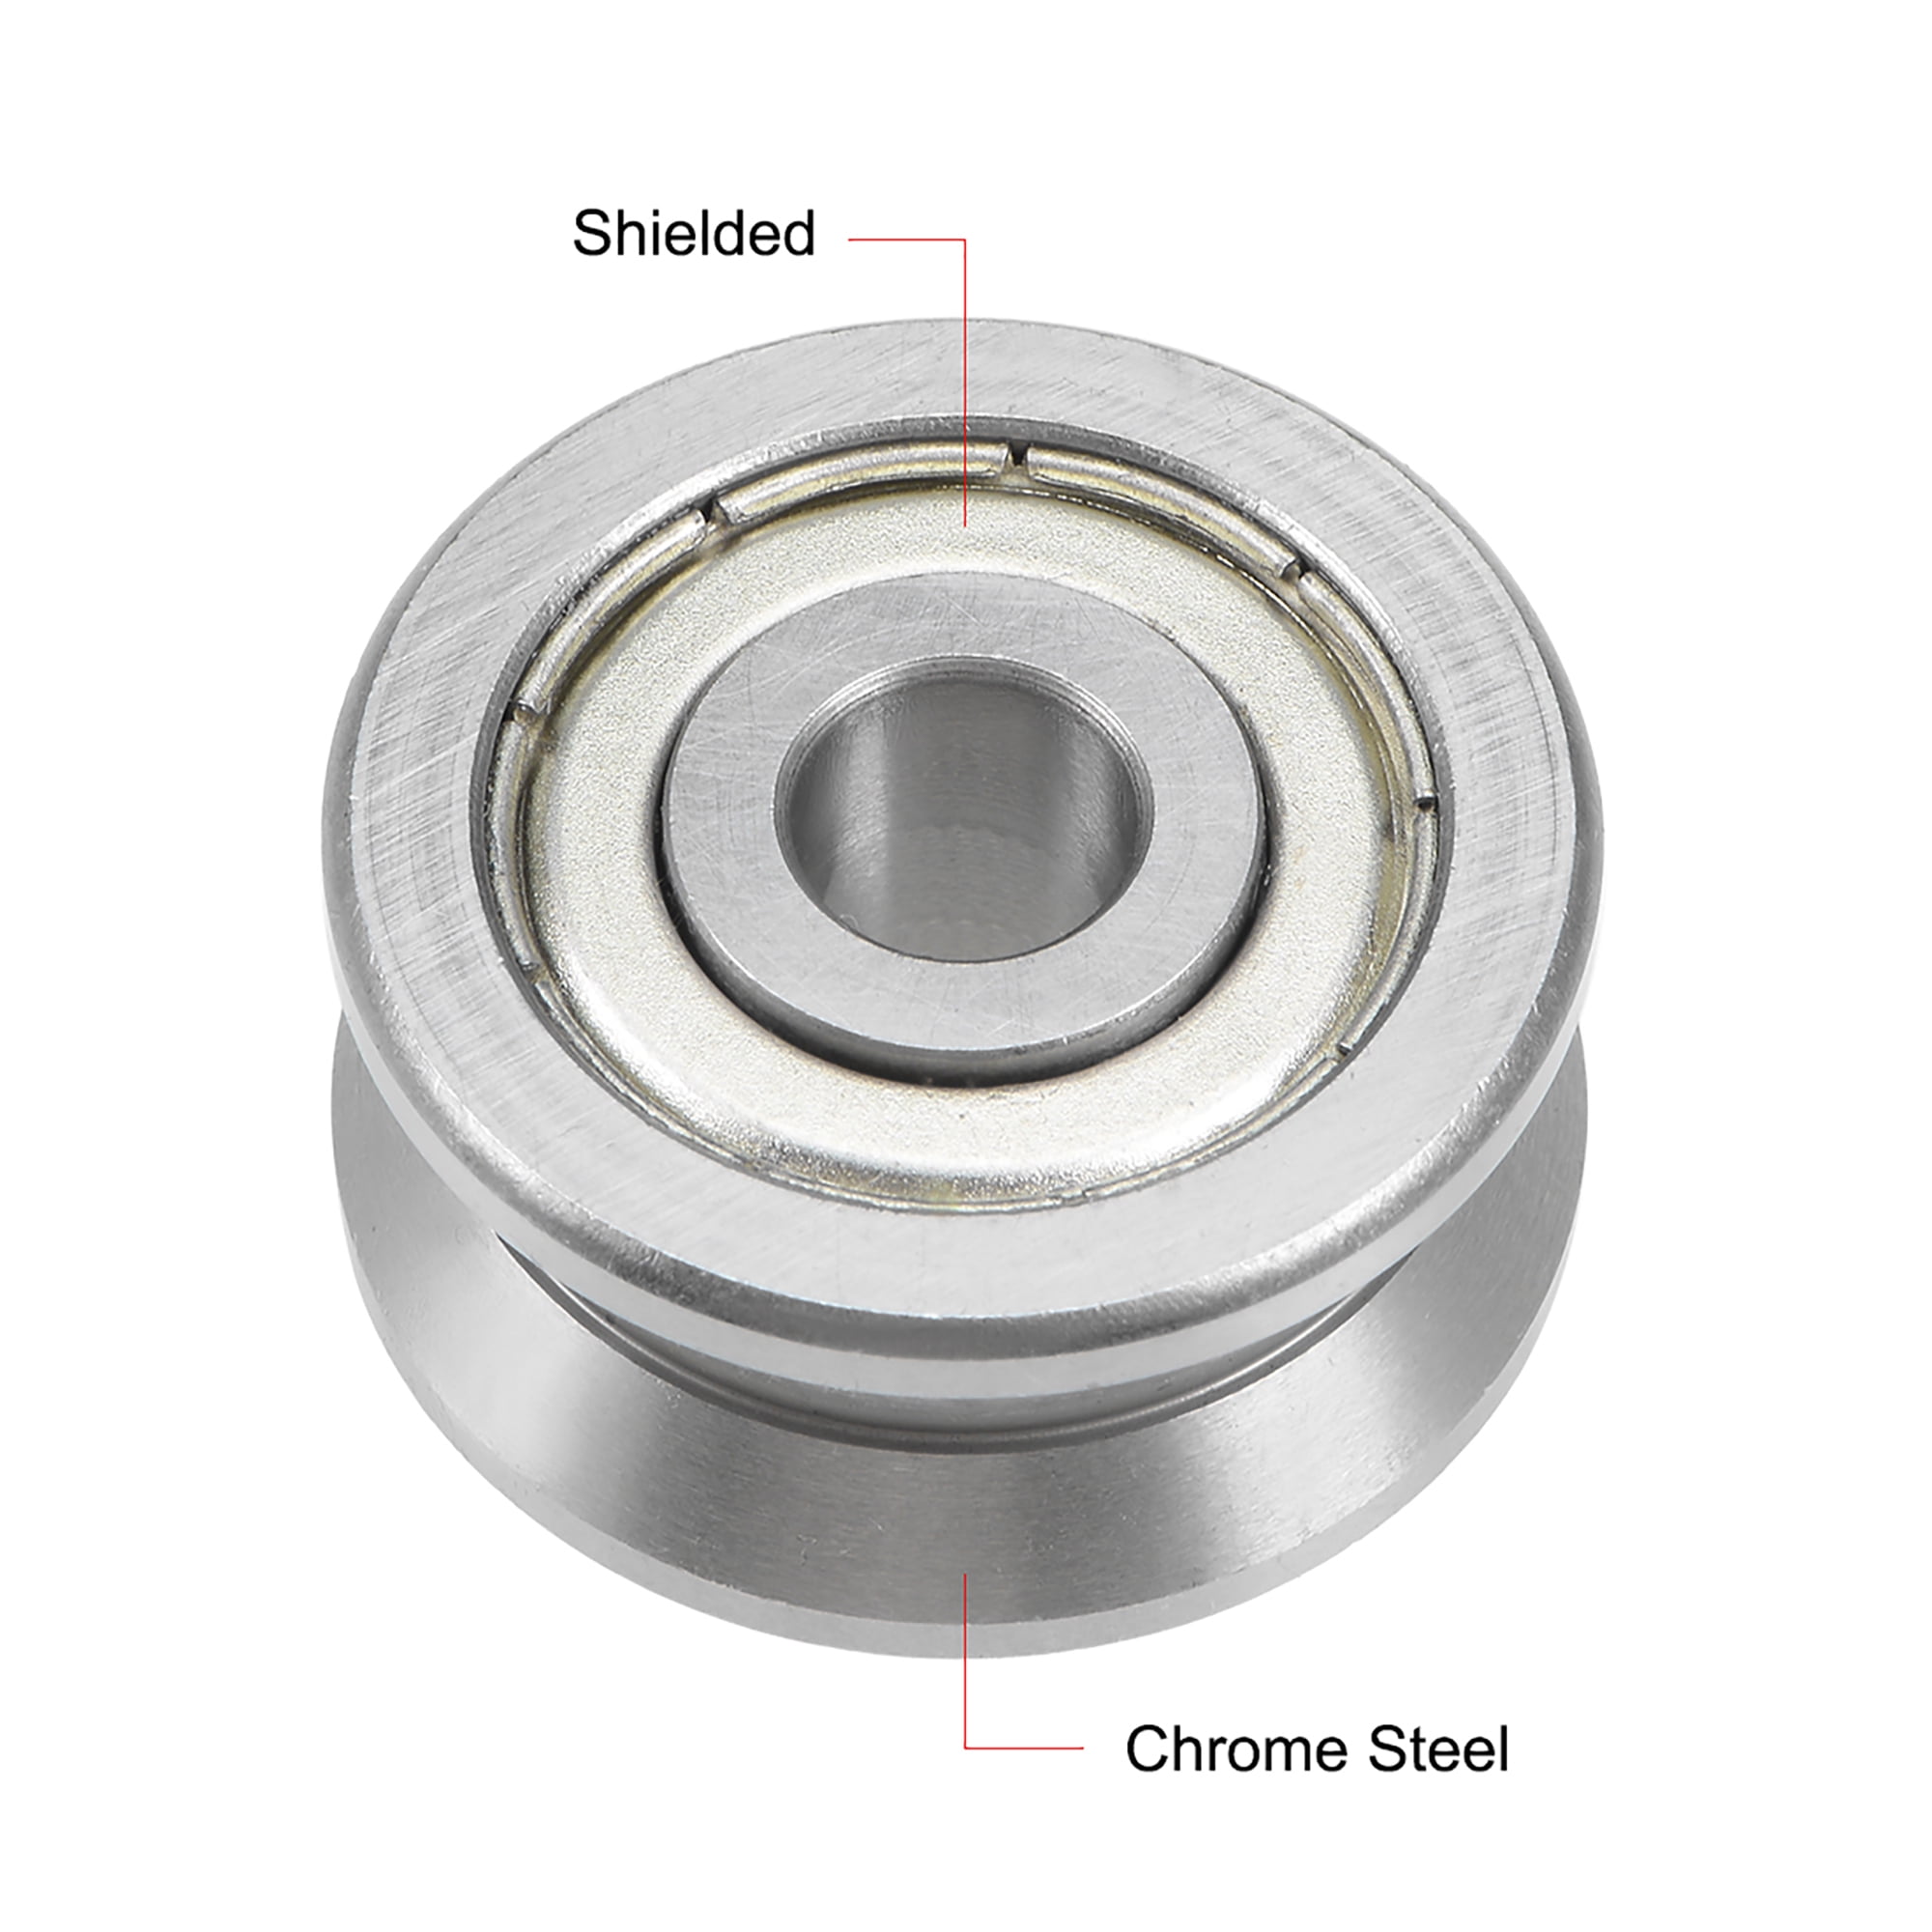 Uxcell 0.31'' x1.18''x0.55'' V-Groove Ball Bearing Guide Pulley Bearings  Chrome Steel Silver Tone 1pcs